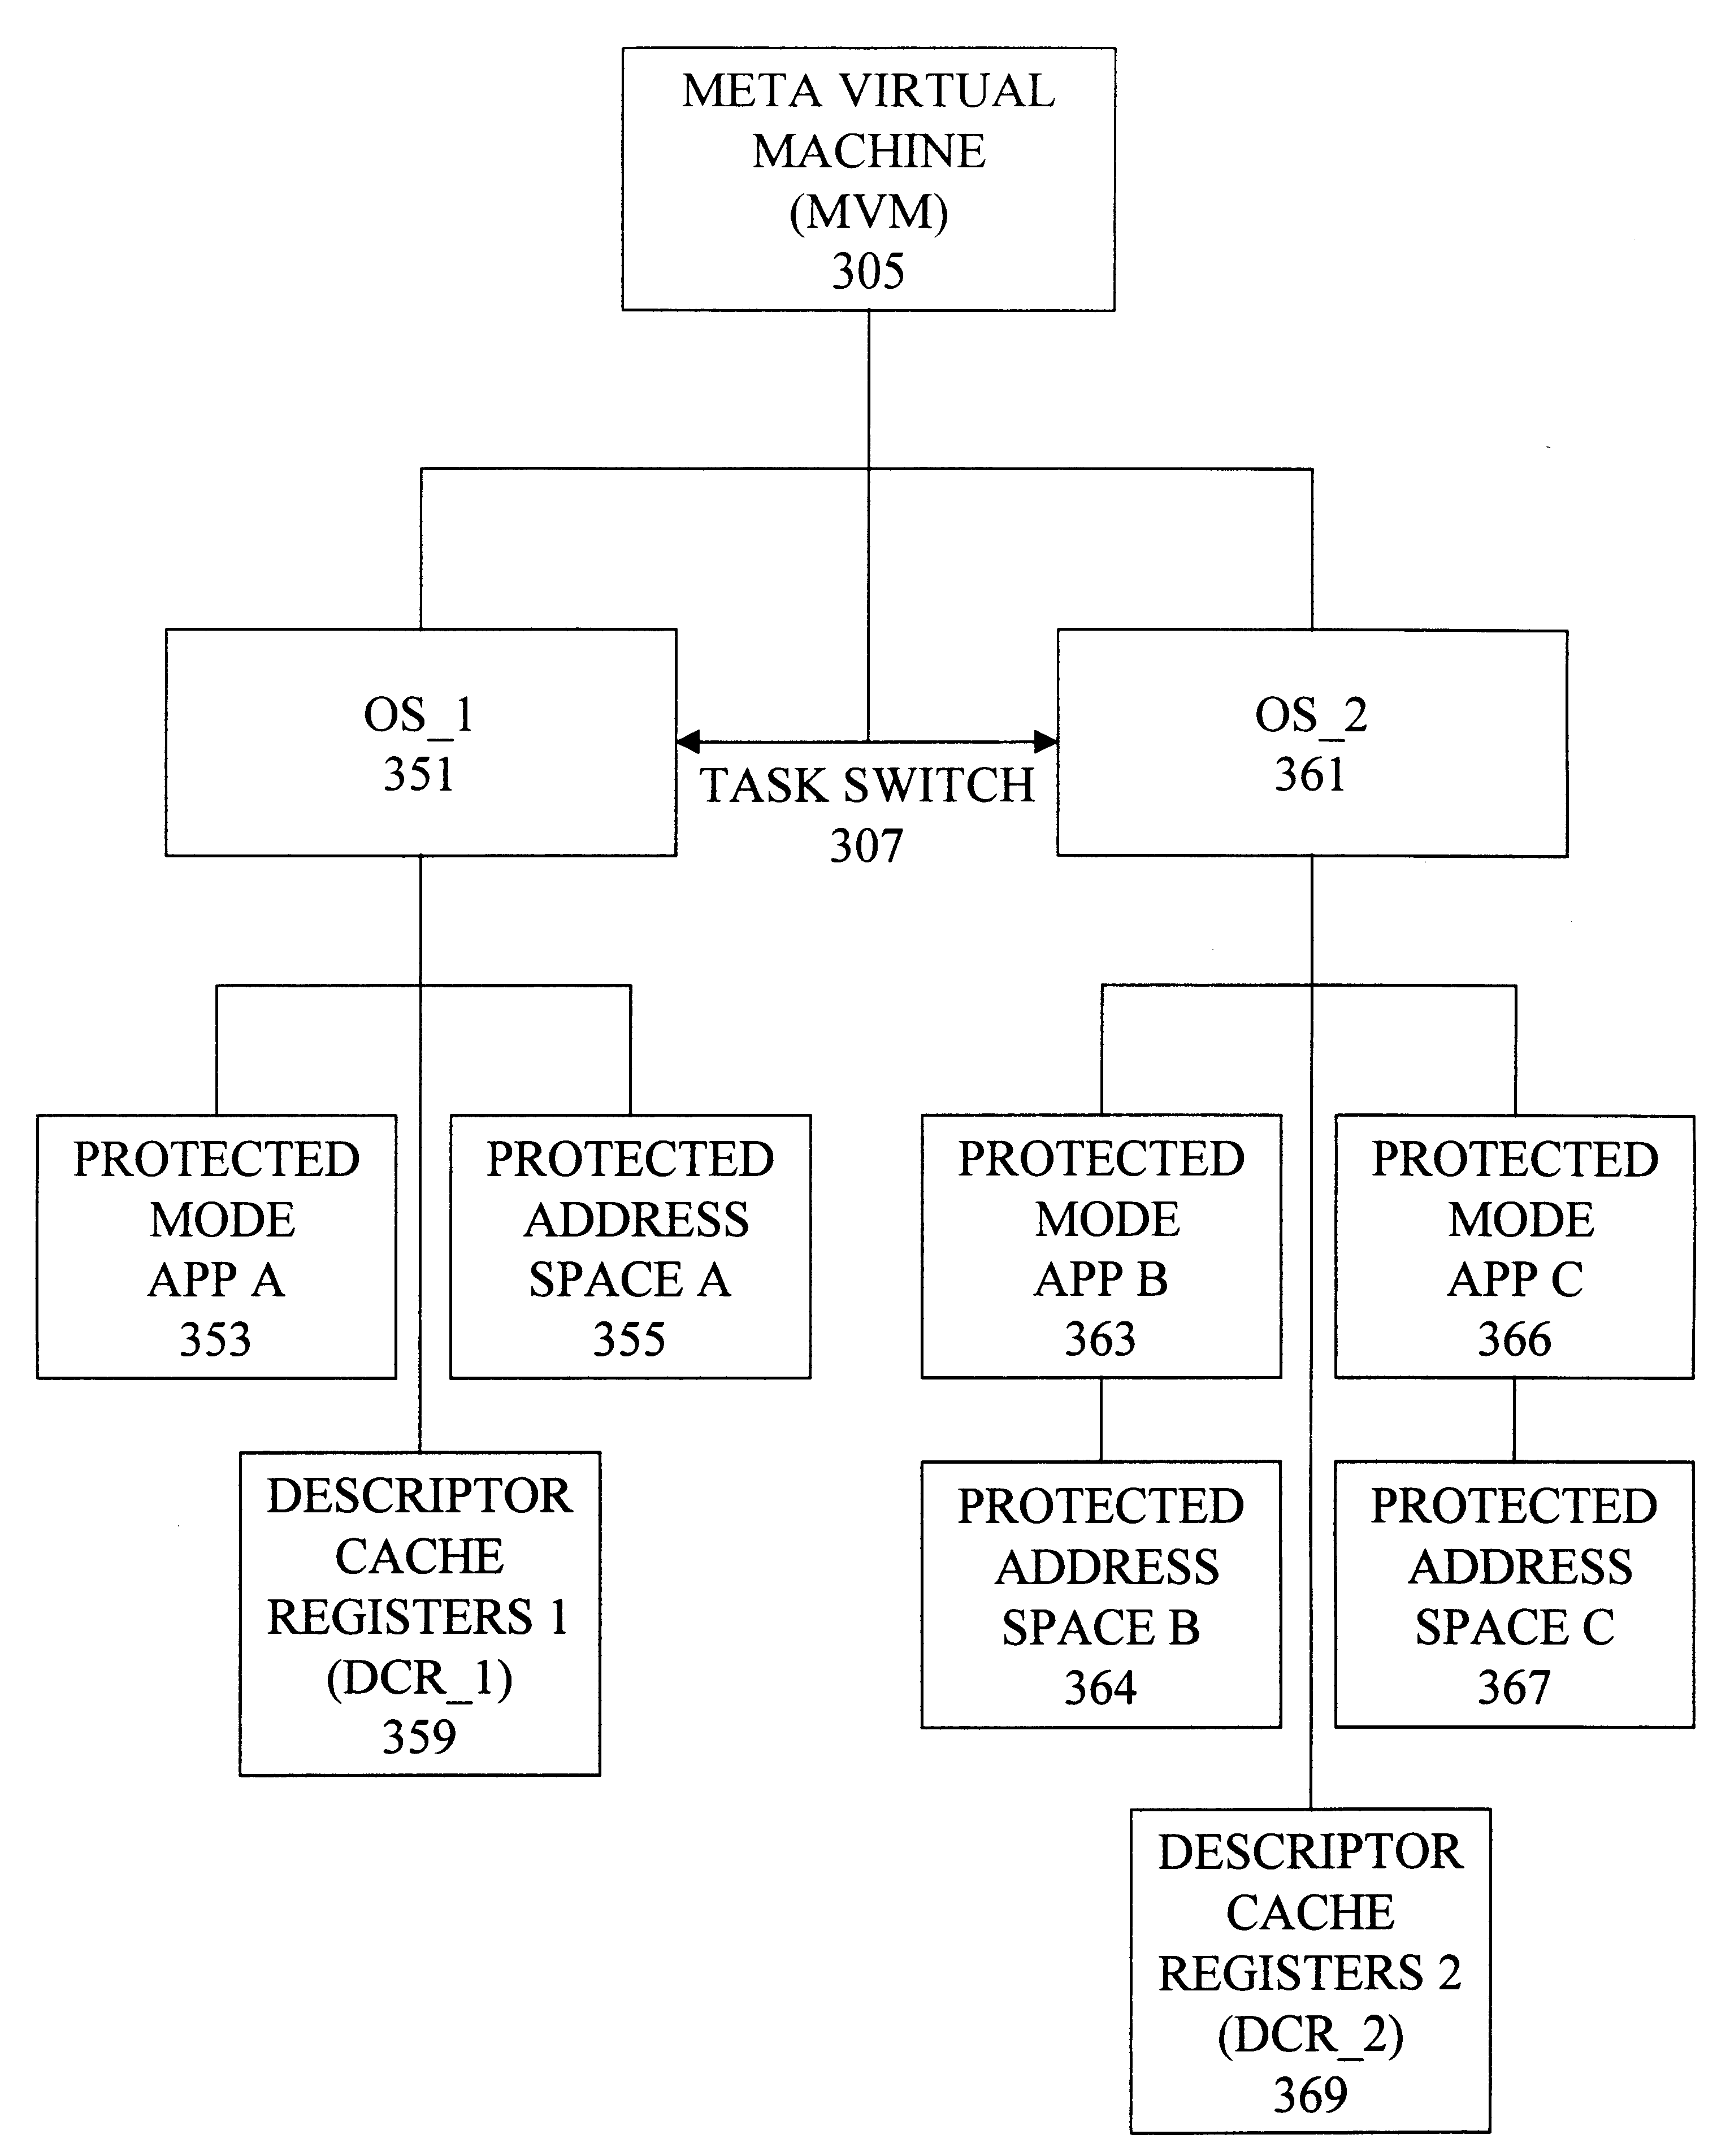 Multiple protected mode execution environments using multiple register sets and meta-protected instructions